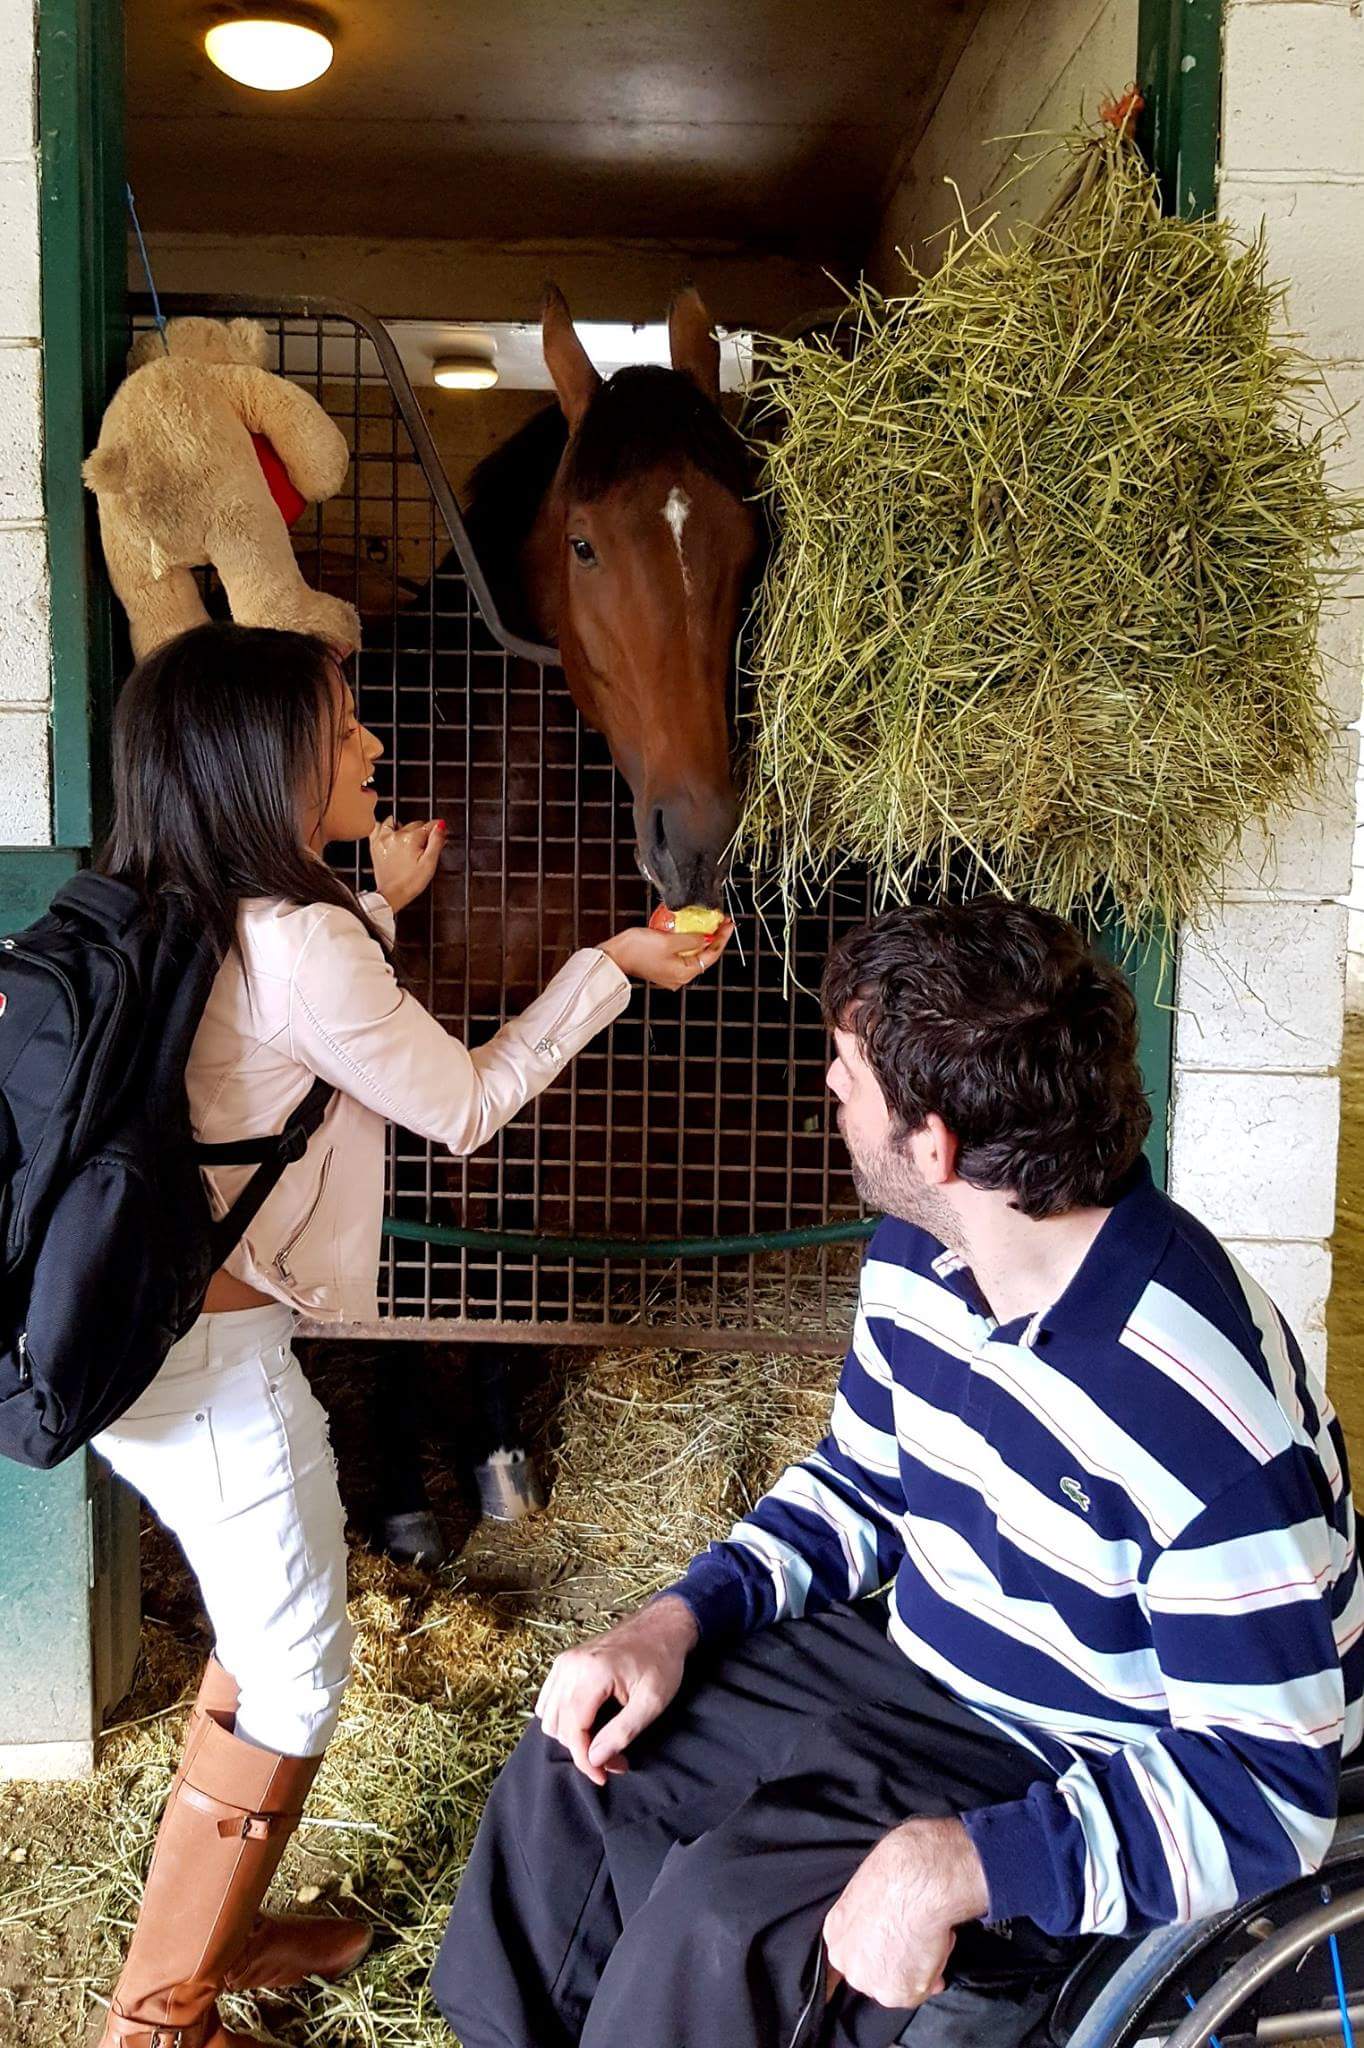 Keish and Goki meet the racehorse A Pic By Mrwill at his barn. Photo: Will Wong